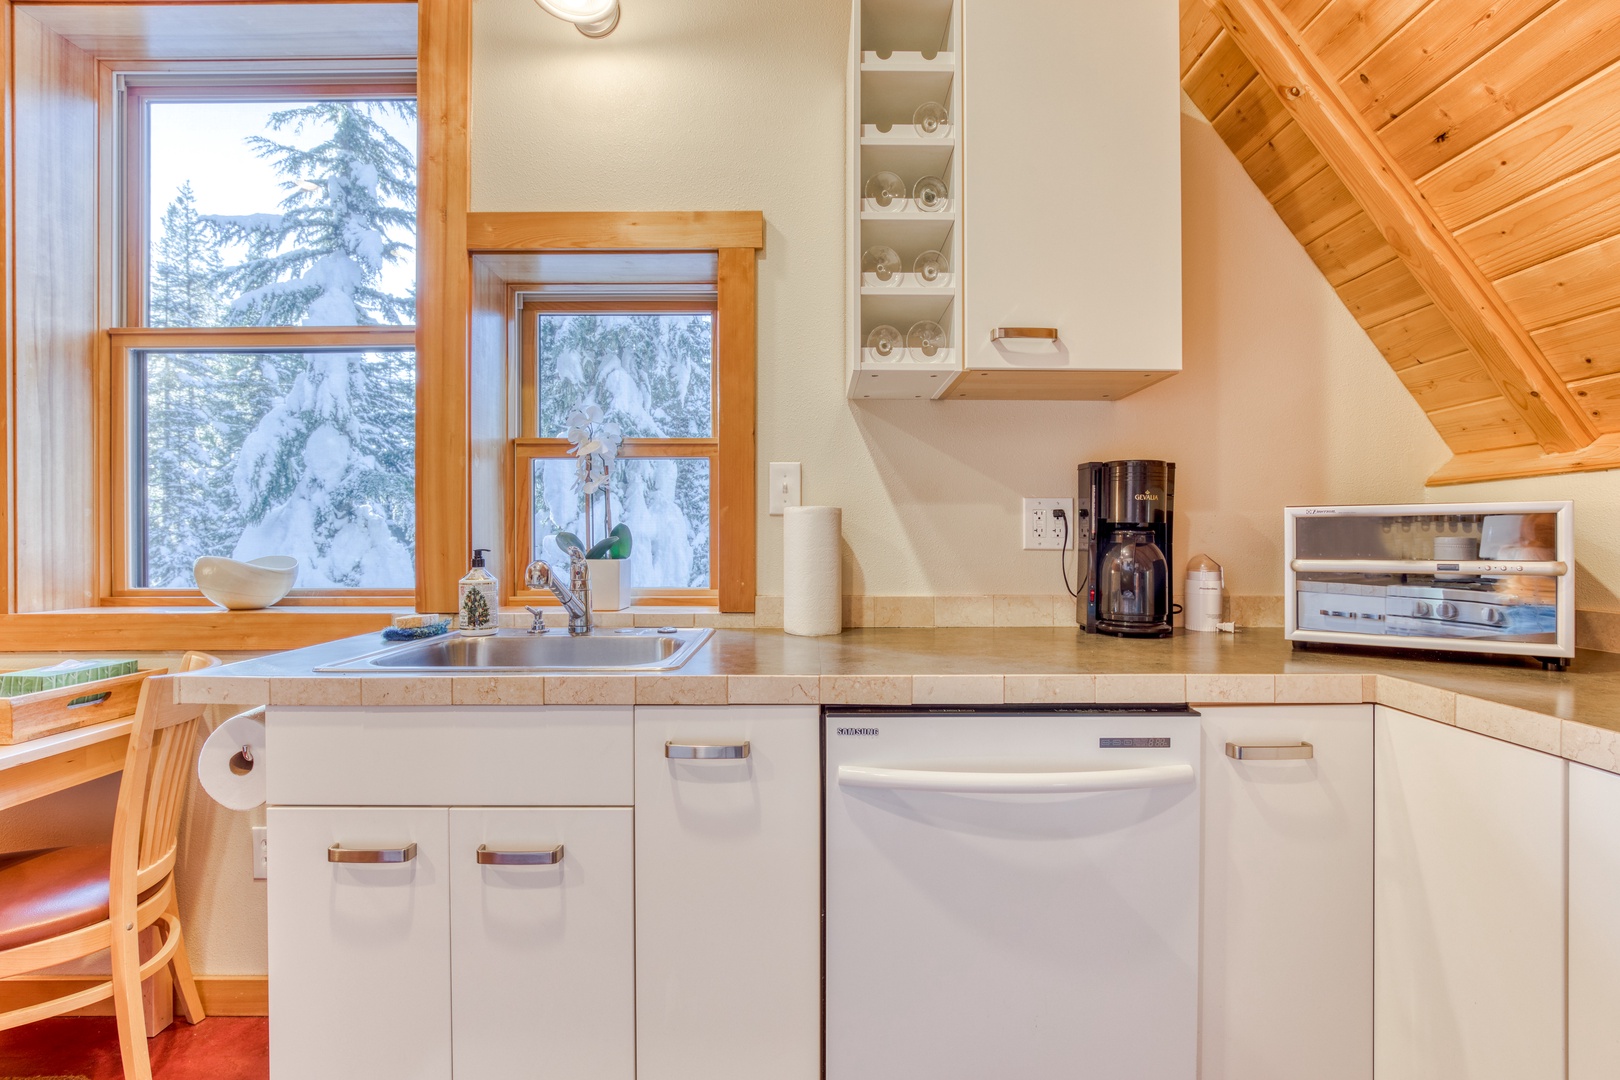 Government Camp Vacation Rentals, Glade Trail Lodge - Kitchen overlooking the nature around the house